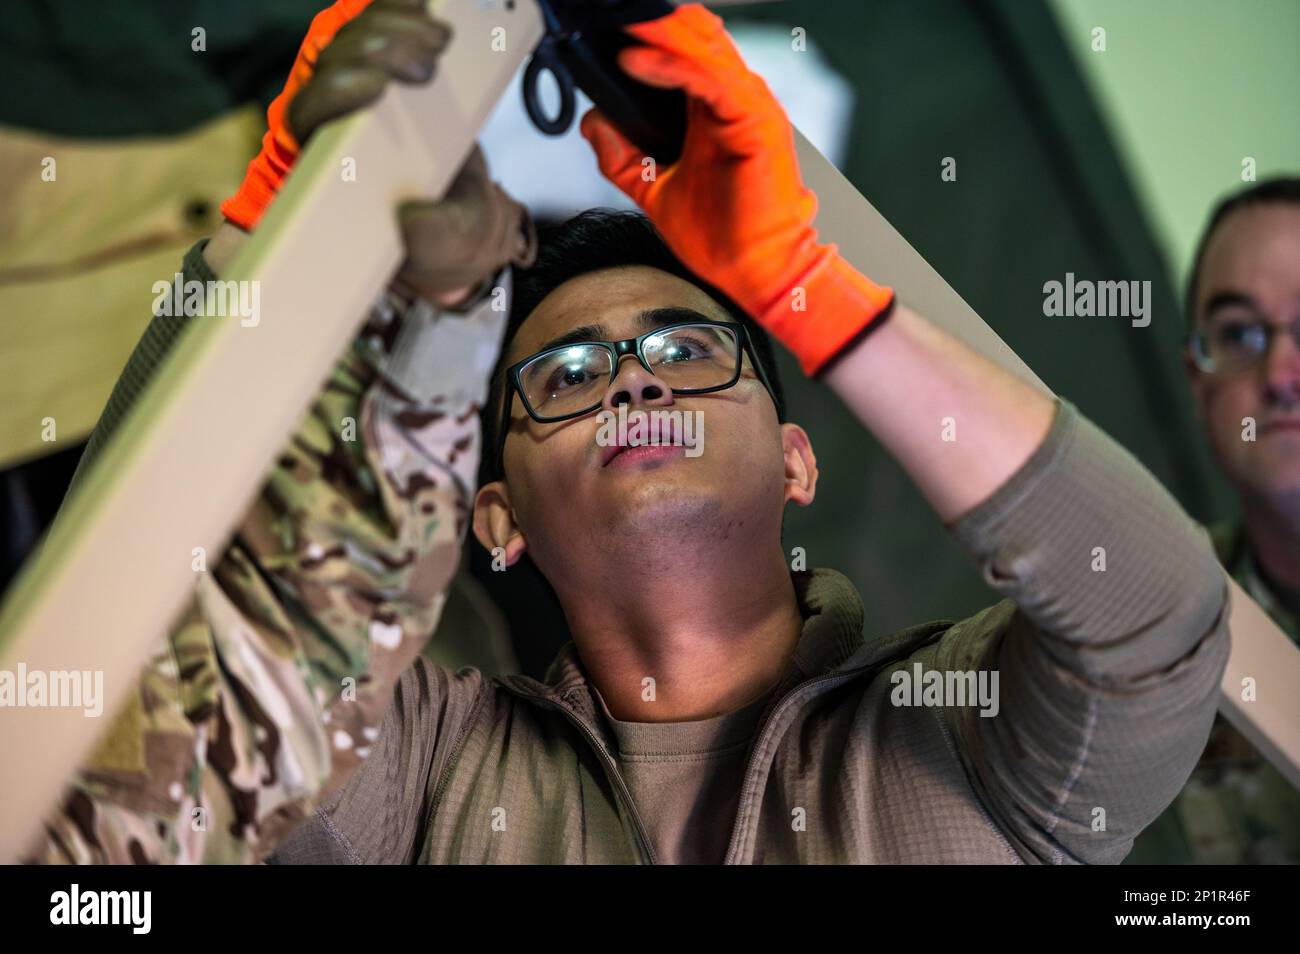 U.S. Air Force Staff Sgt. Kiven Alfelor, 51st Medical Support Squadron war reserve material maintenance craftsman, adjusts the frame coupling of a Tent Kit 2 (TK2) expeditionary medical support shelter during a training event at Osan Air Base, Republic of Korea, Jan. 12, 2023. The TK2 allows personnel to operate without mission oriented protective posture (MOPP) gear while inside, allowing freedom of movement and unfettered communication in a hazardous environment. Stock Photo